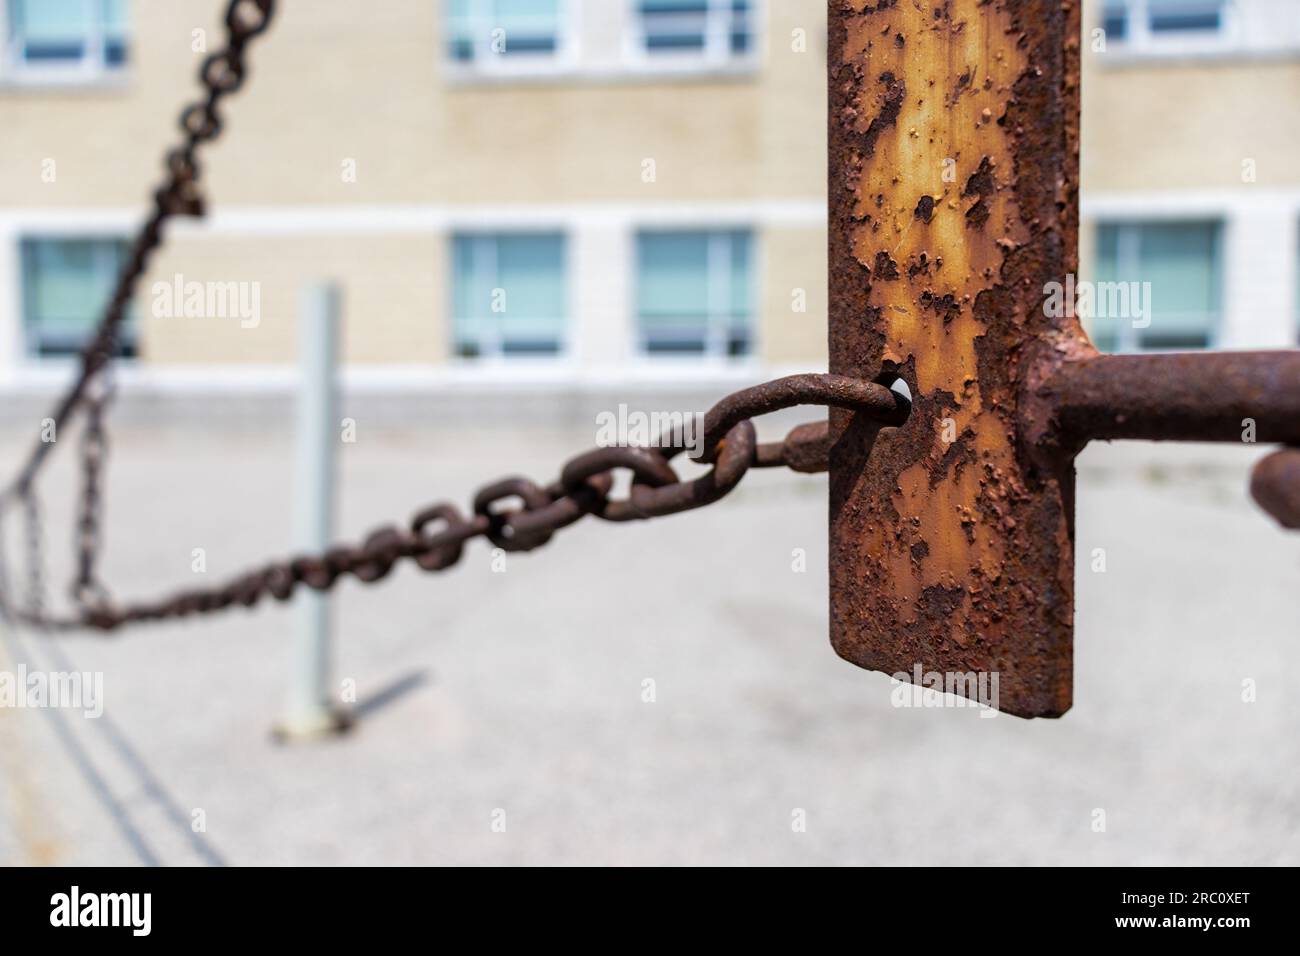 Rusted metal chain fence gate - blurred background. Taken in Toronto, Canada. Stock Photo